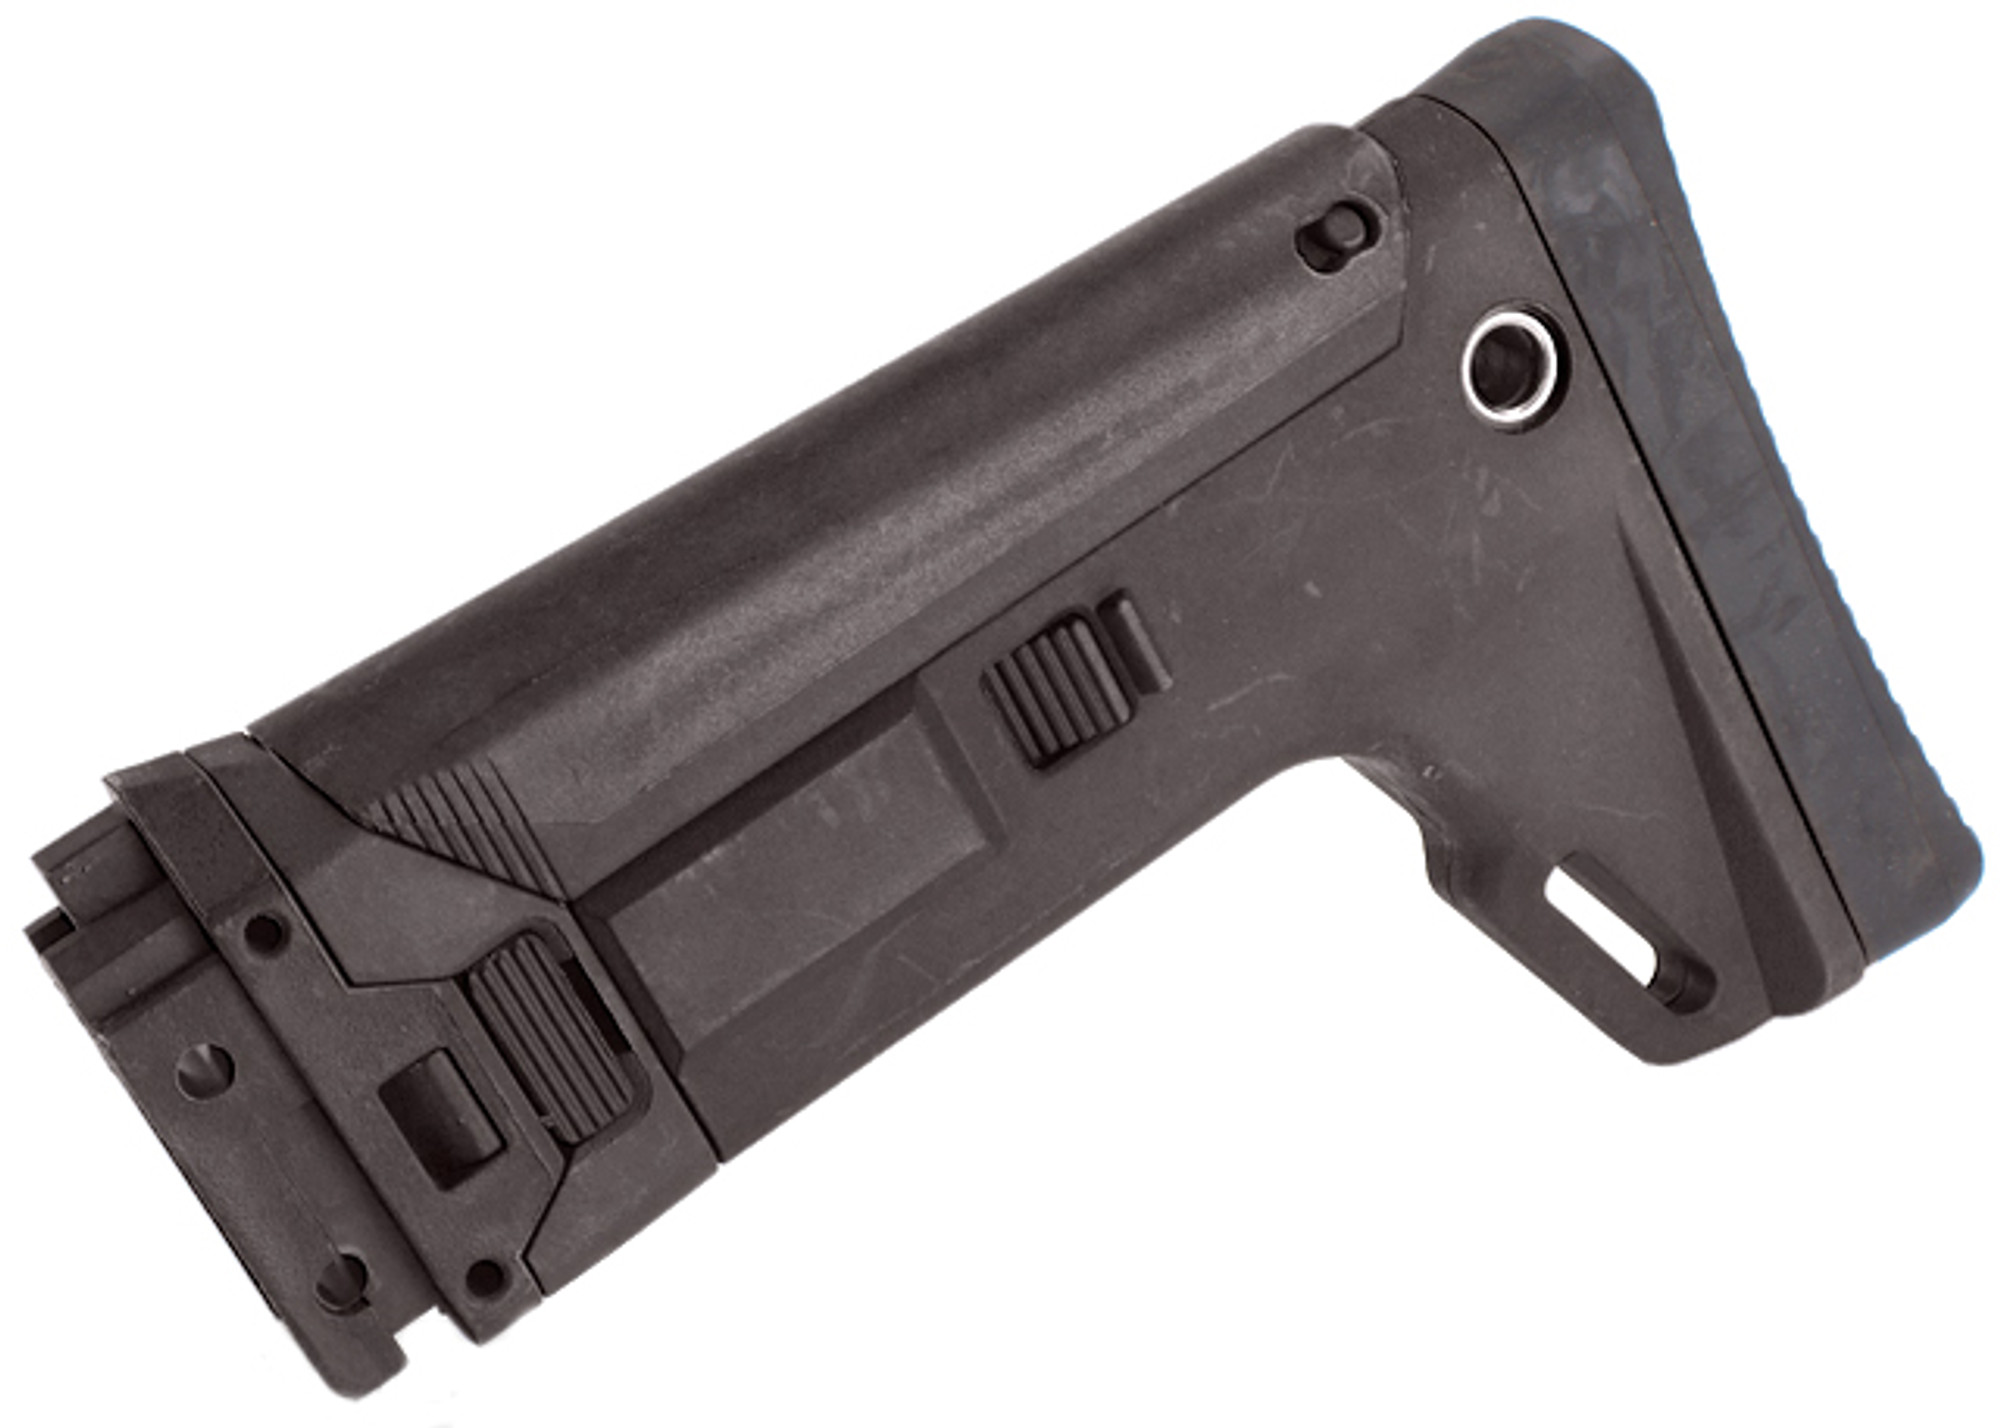 Replacement Stock Assembly for A&K Masada ACR - Black